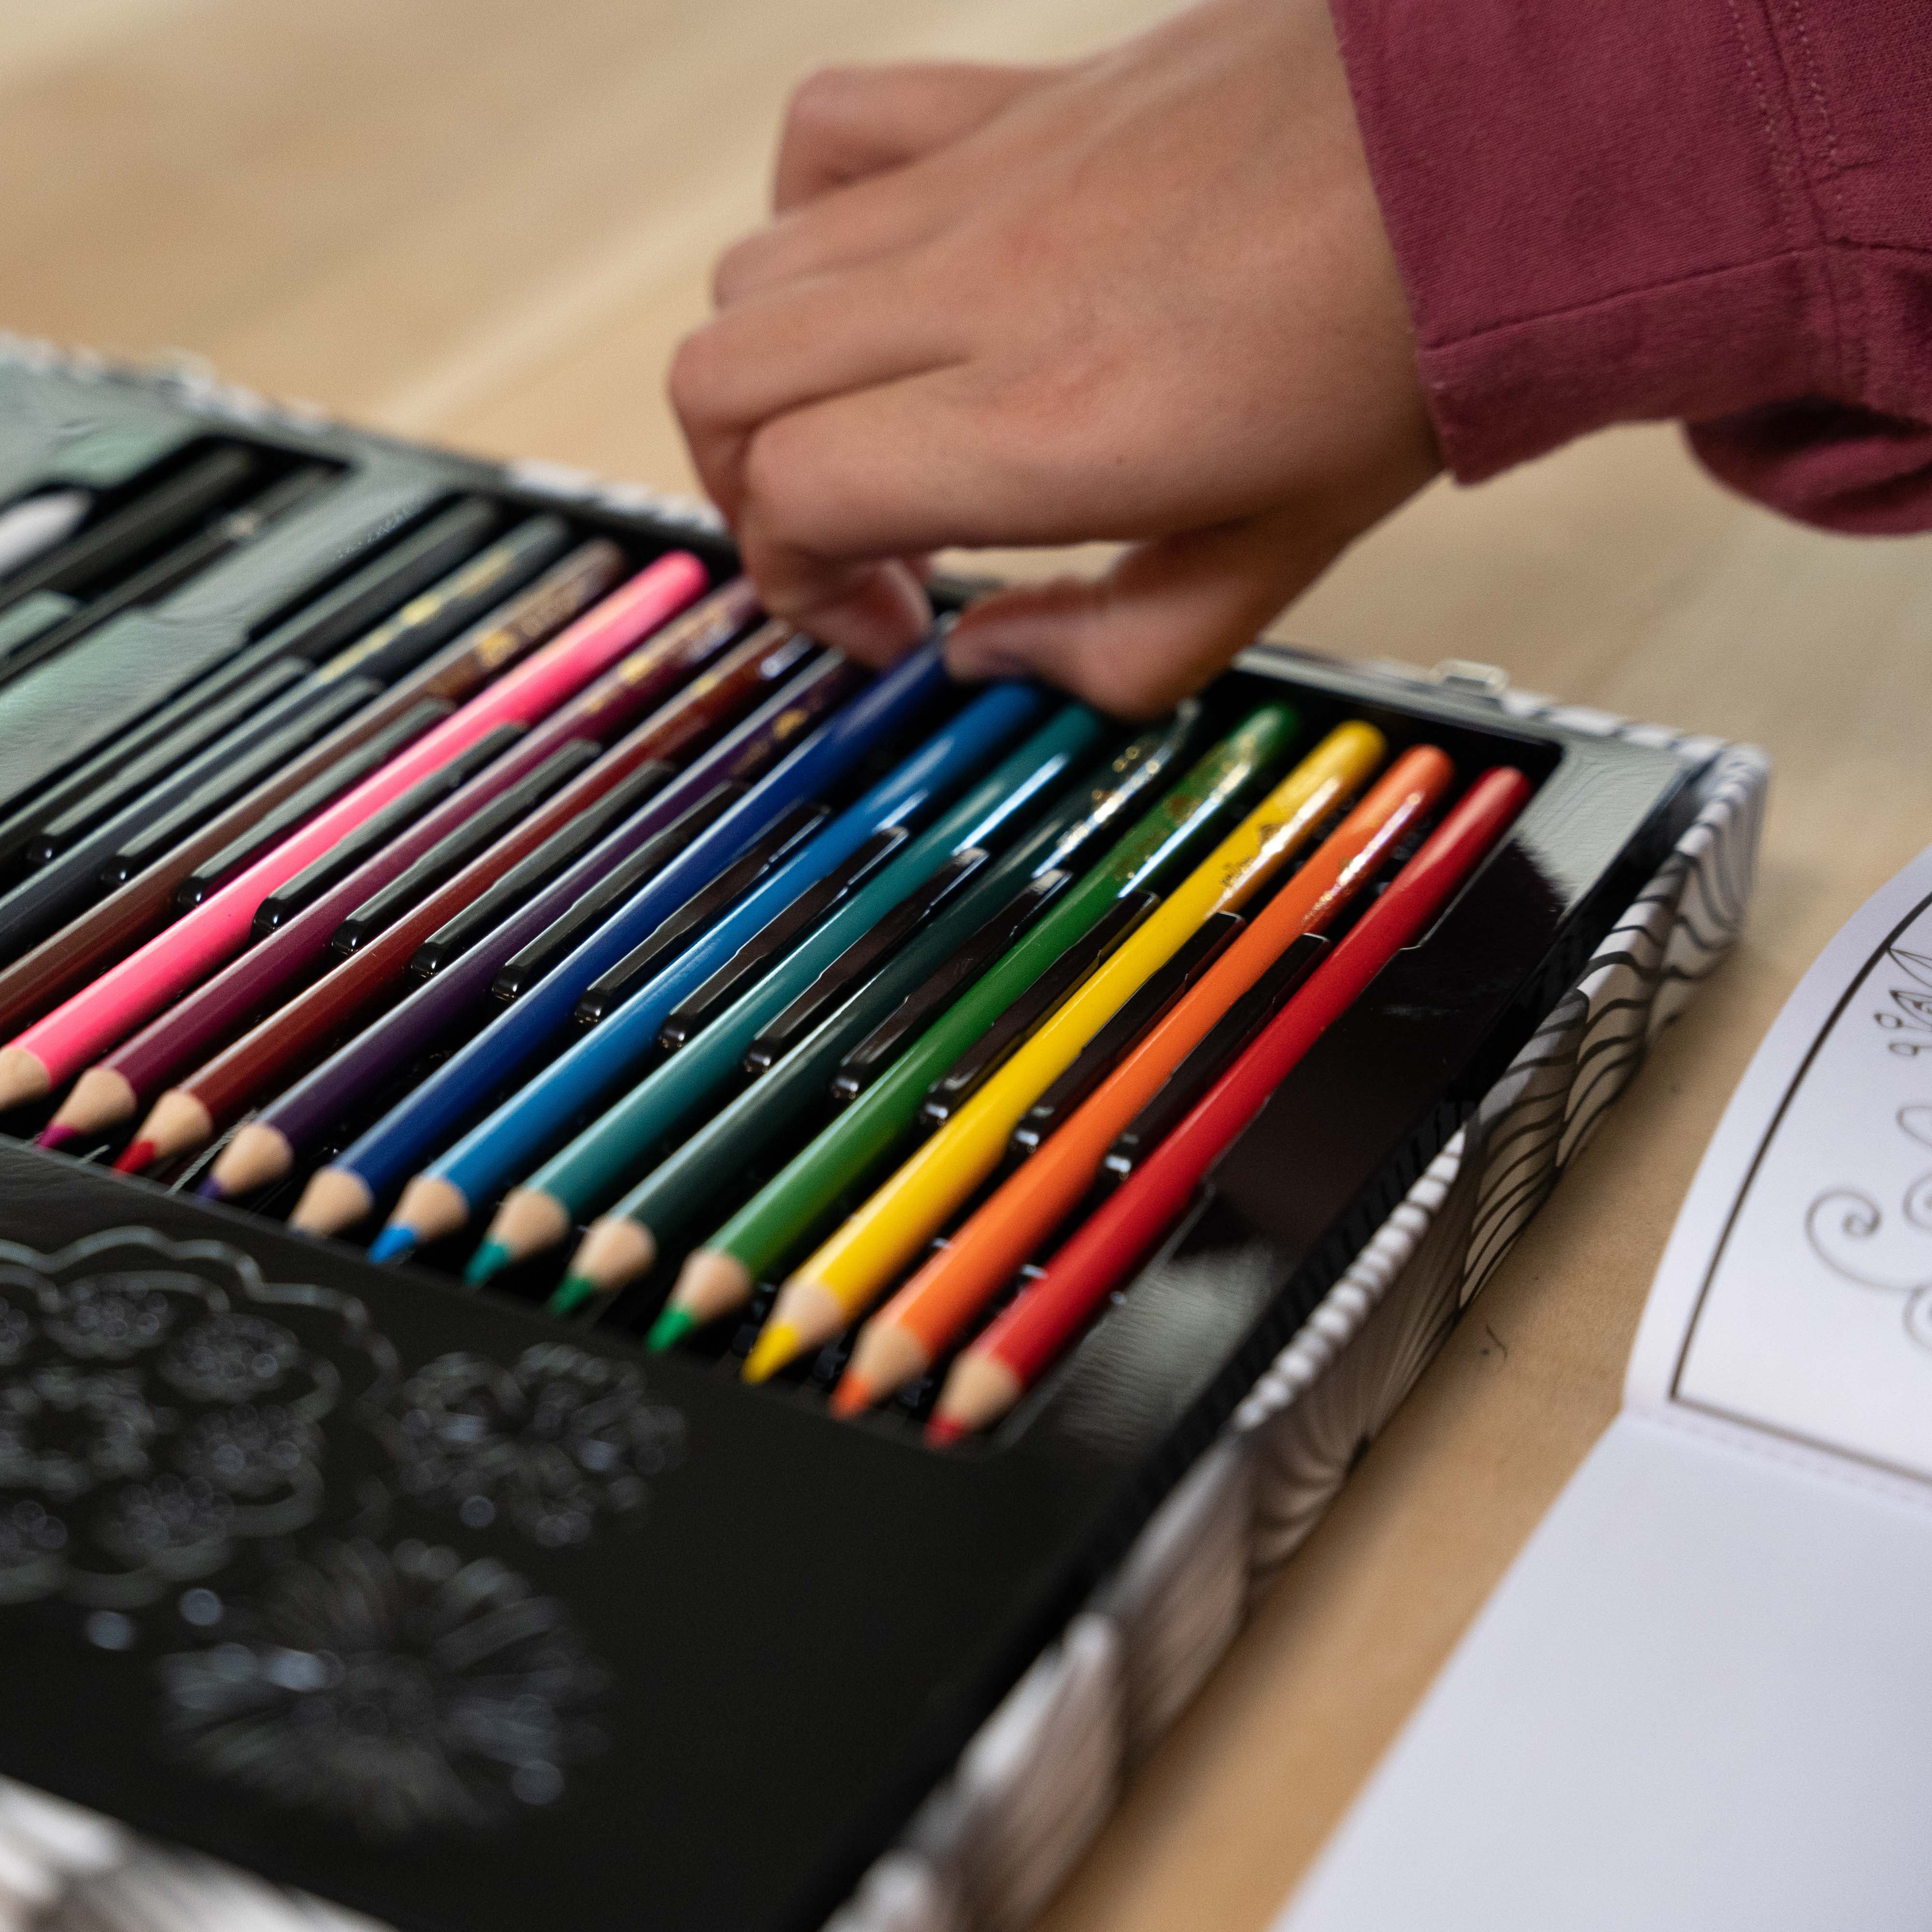 Cra-Z-Art - 🌟CLOSED🌟 Enter for your chance to win our Timeless Creations  The Art of Coloring: Coloring Studio! This beautiful portable kit keeps  everything in one place. Enter for your chance to